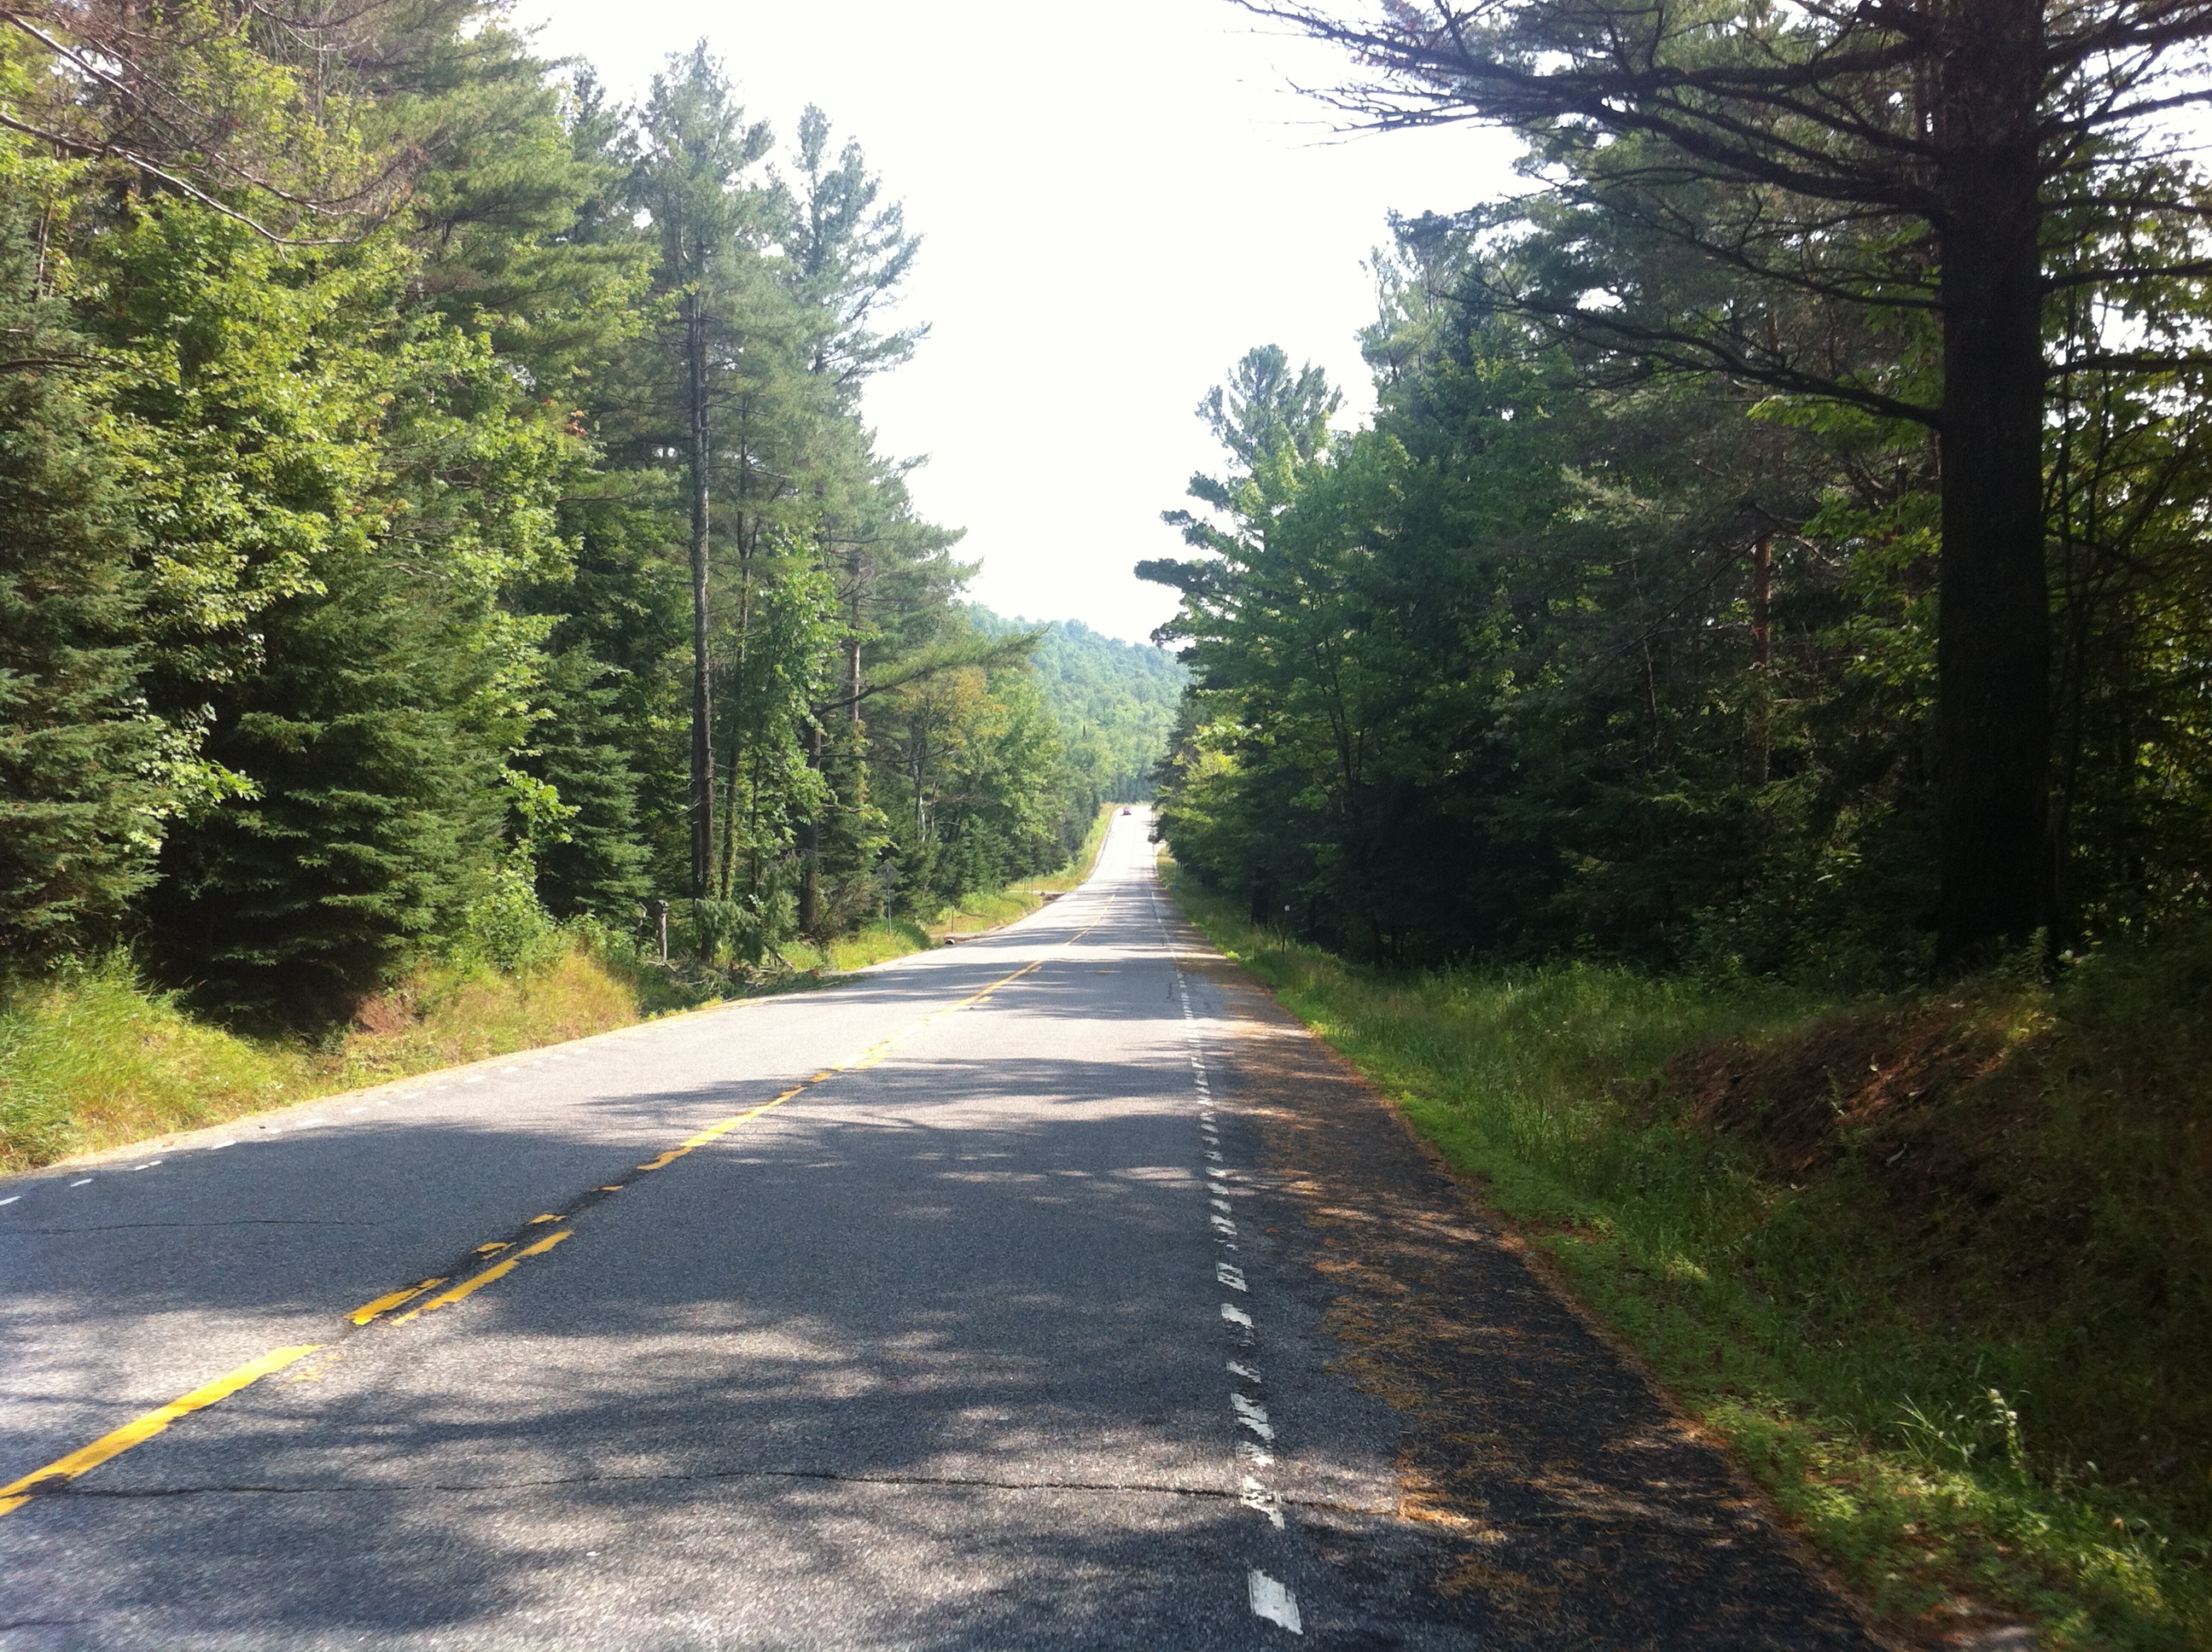 One of the many picturesque roads around Lake Placid.